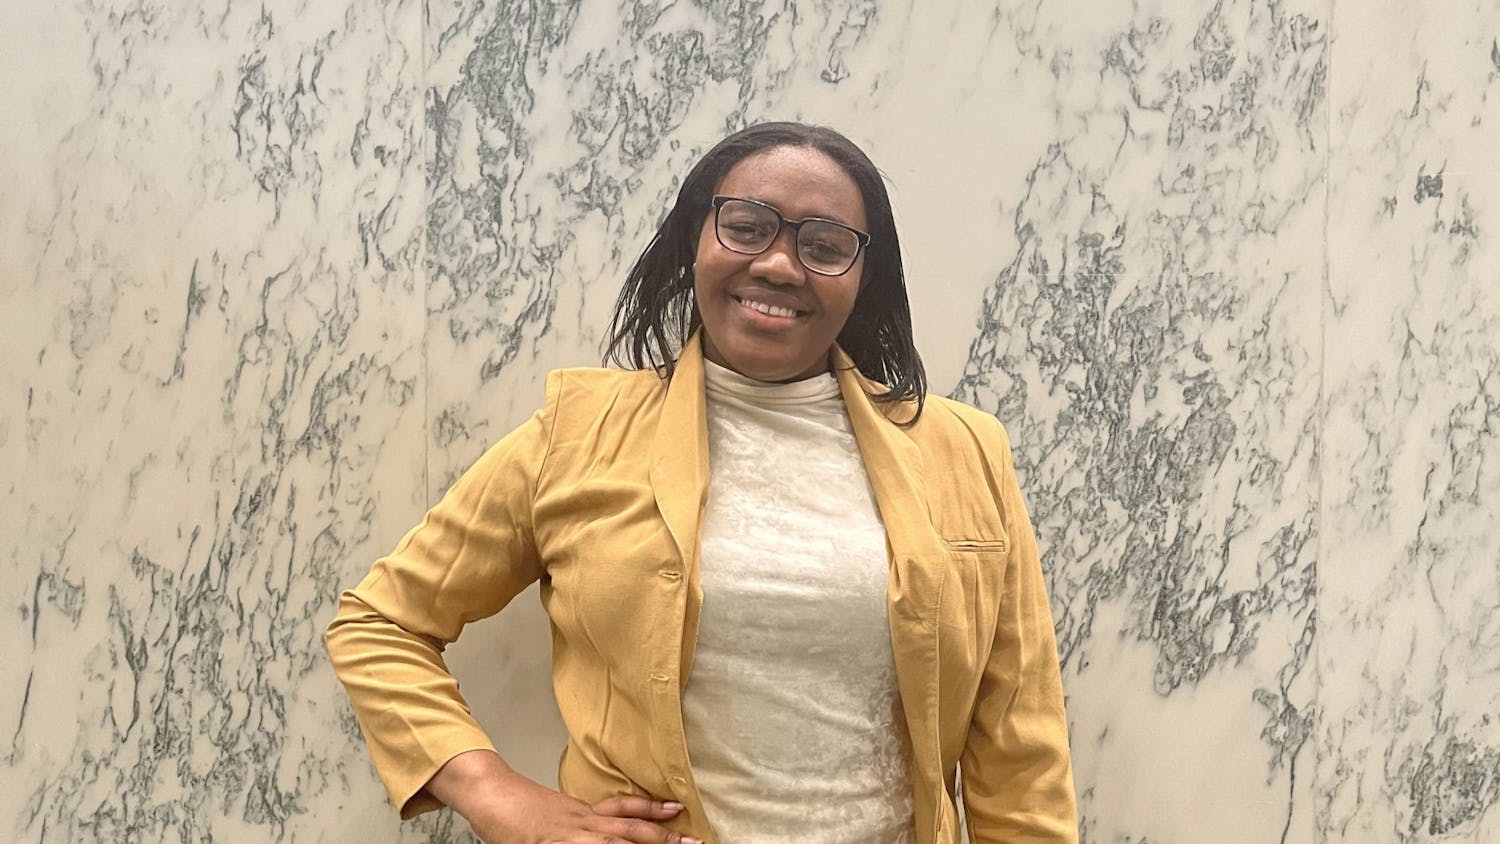 Turton won a special election last week for 2023-24 UB Council student representative.